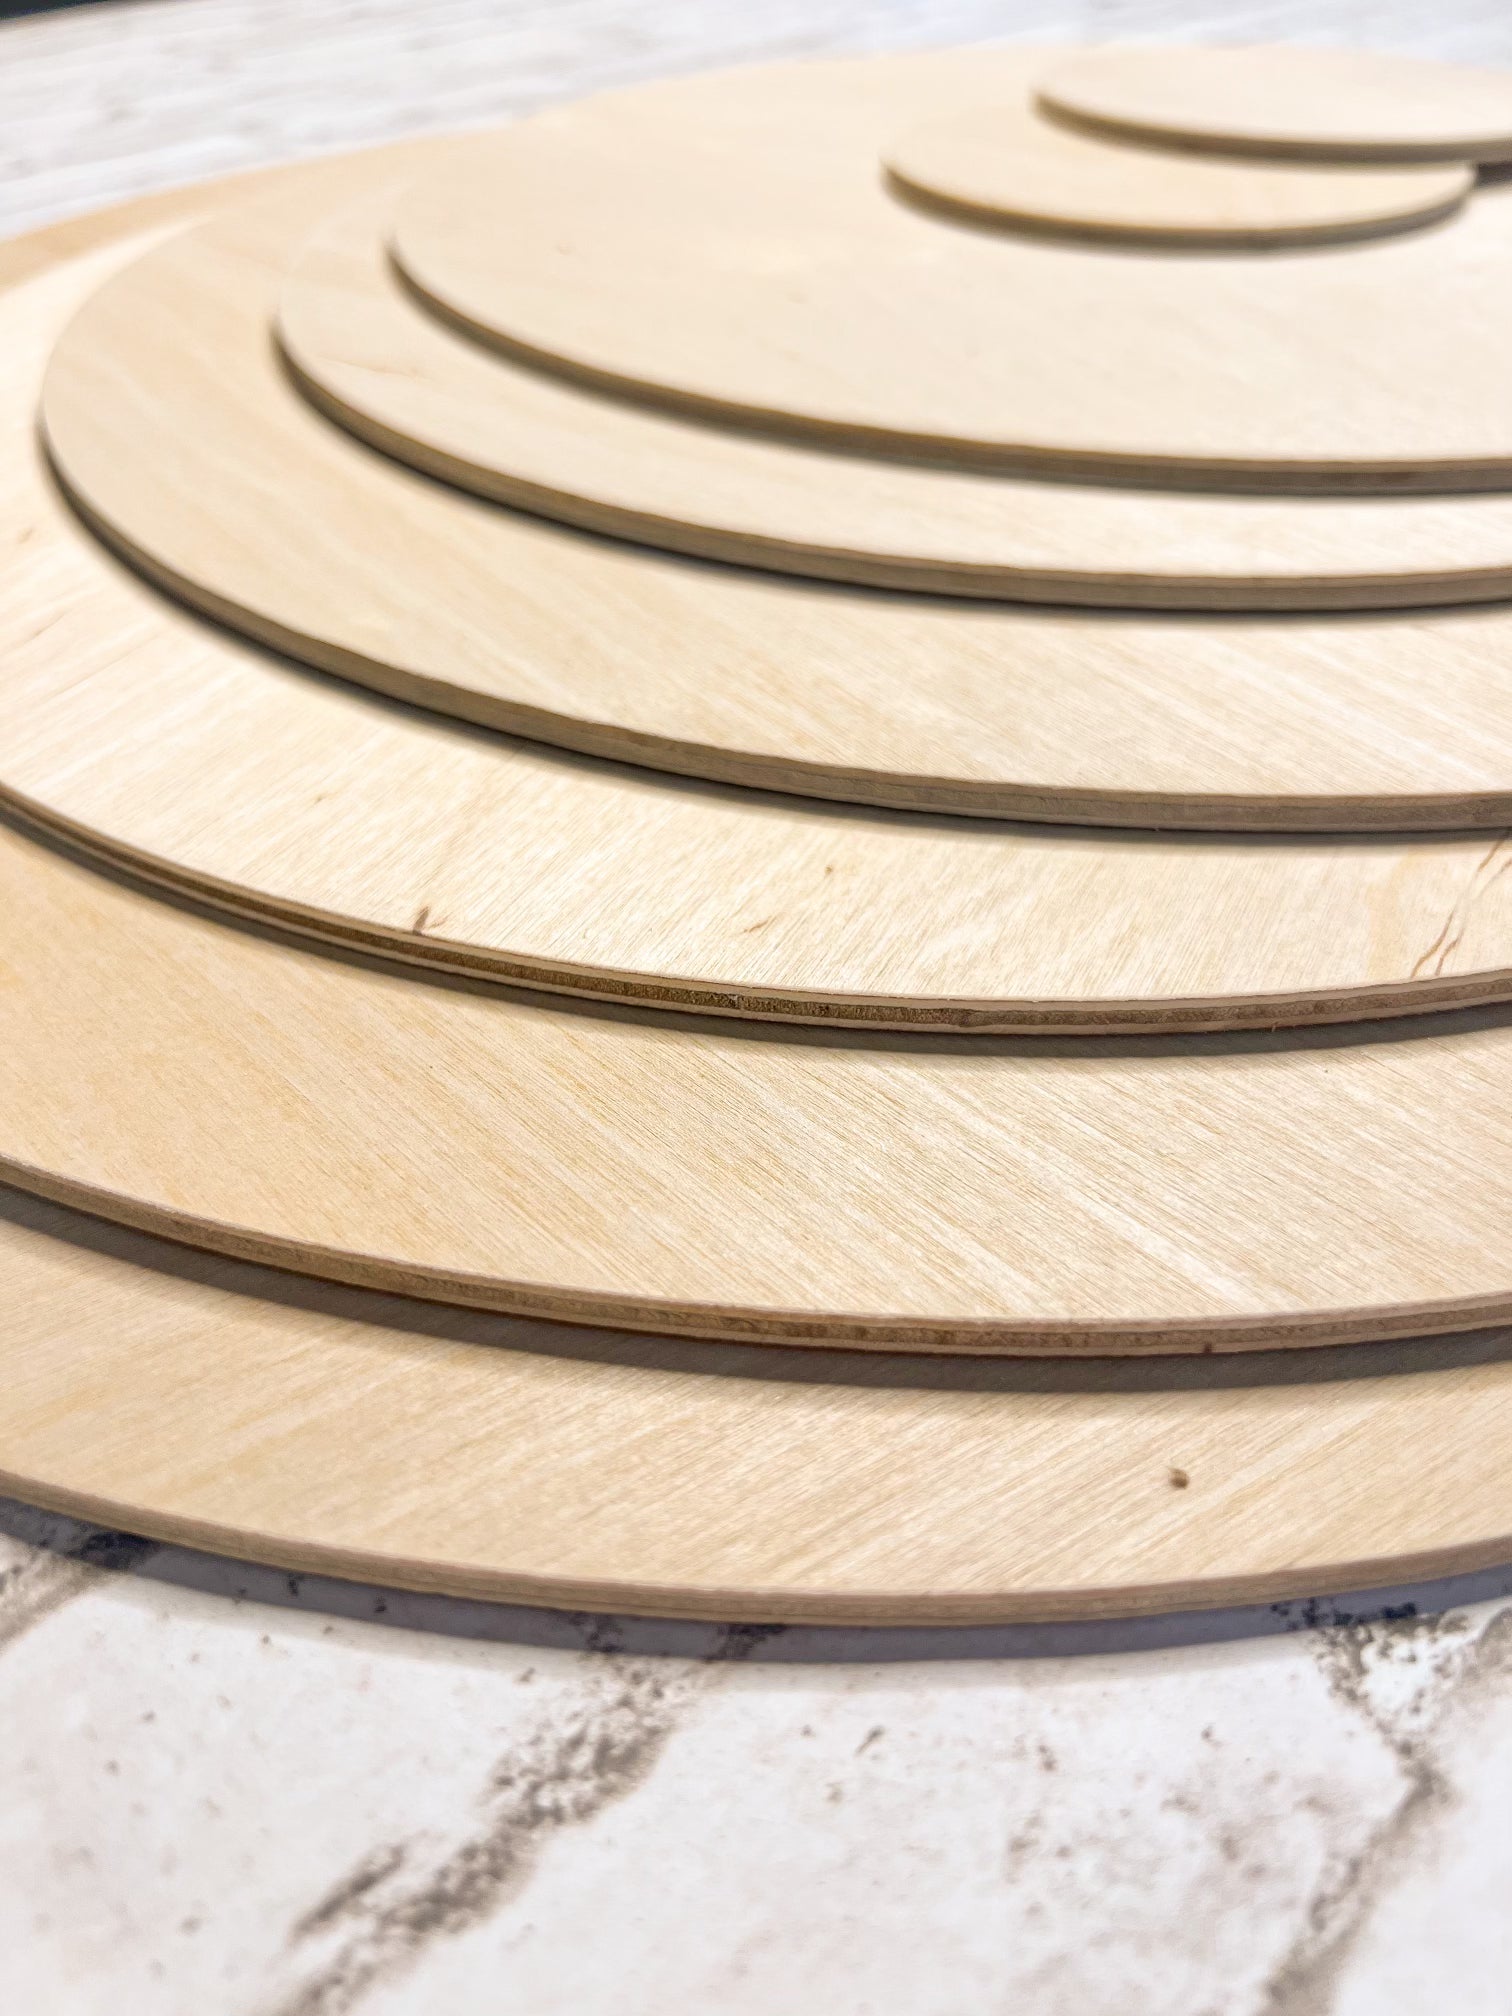 Wood Circles 20 inch, 3 Thicknesses, Unfinished Birch Sign Plaques | Woodpeckers | 1/2 Thick | Michaels